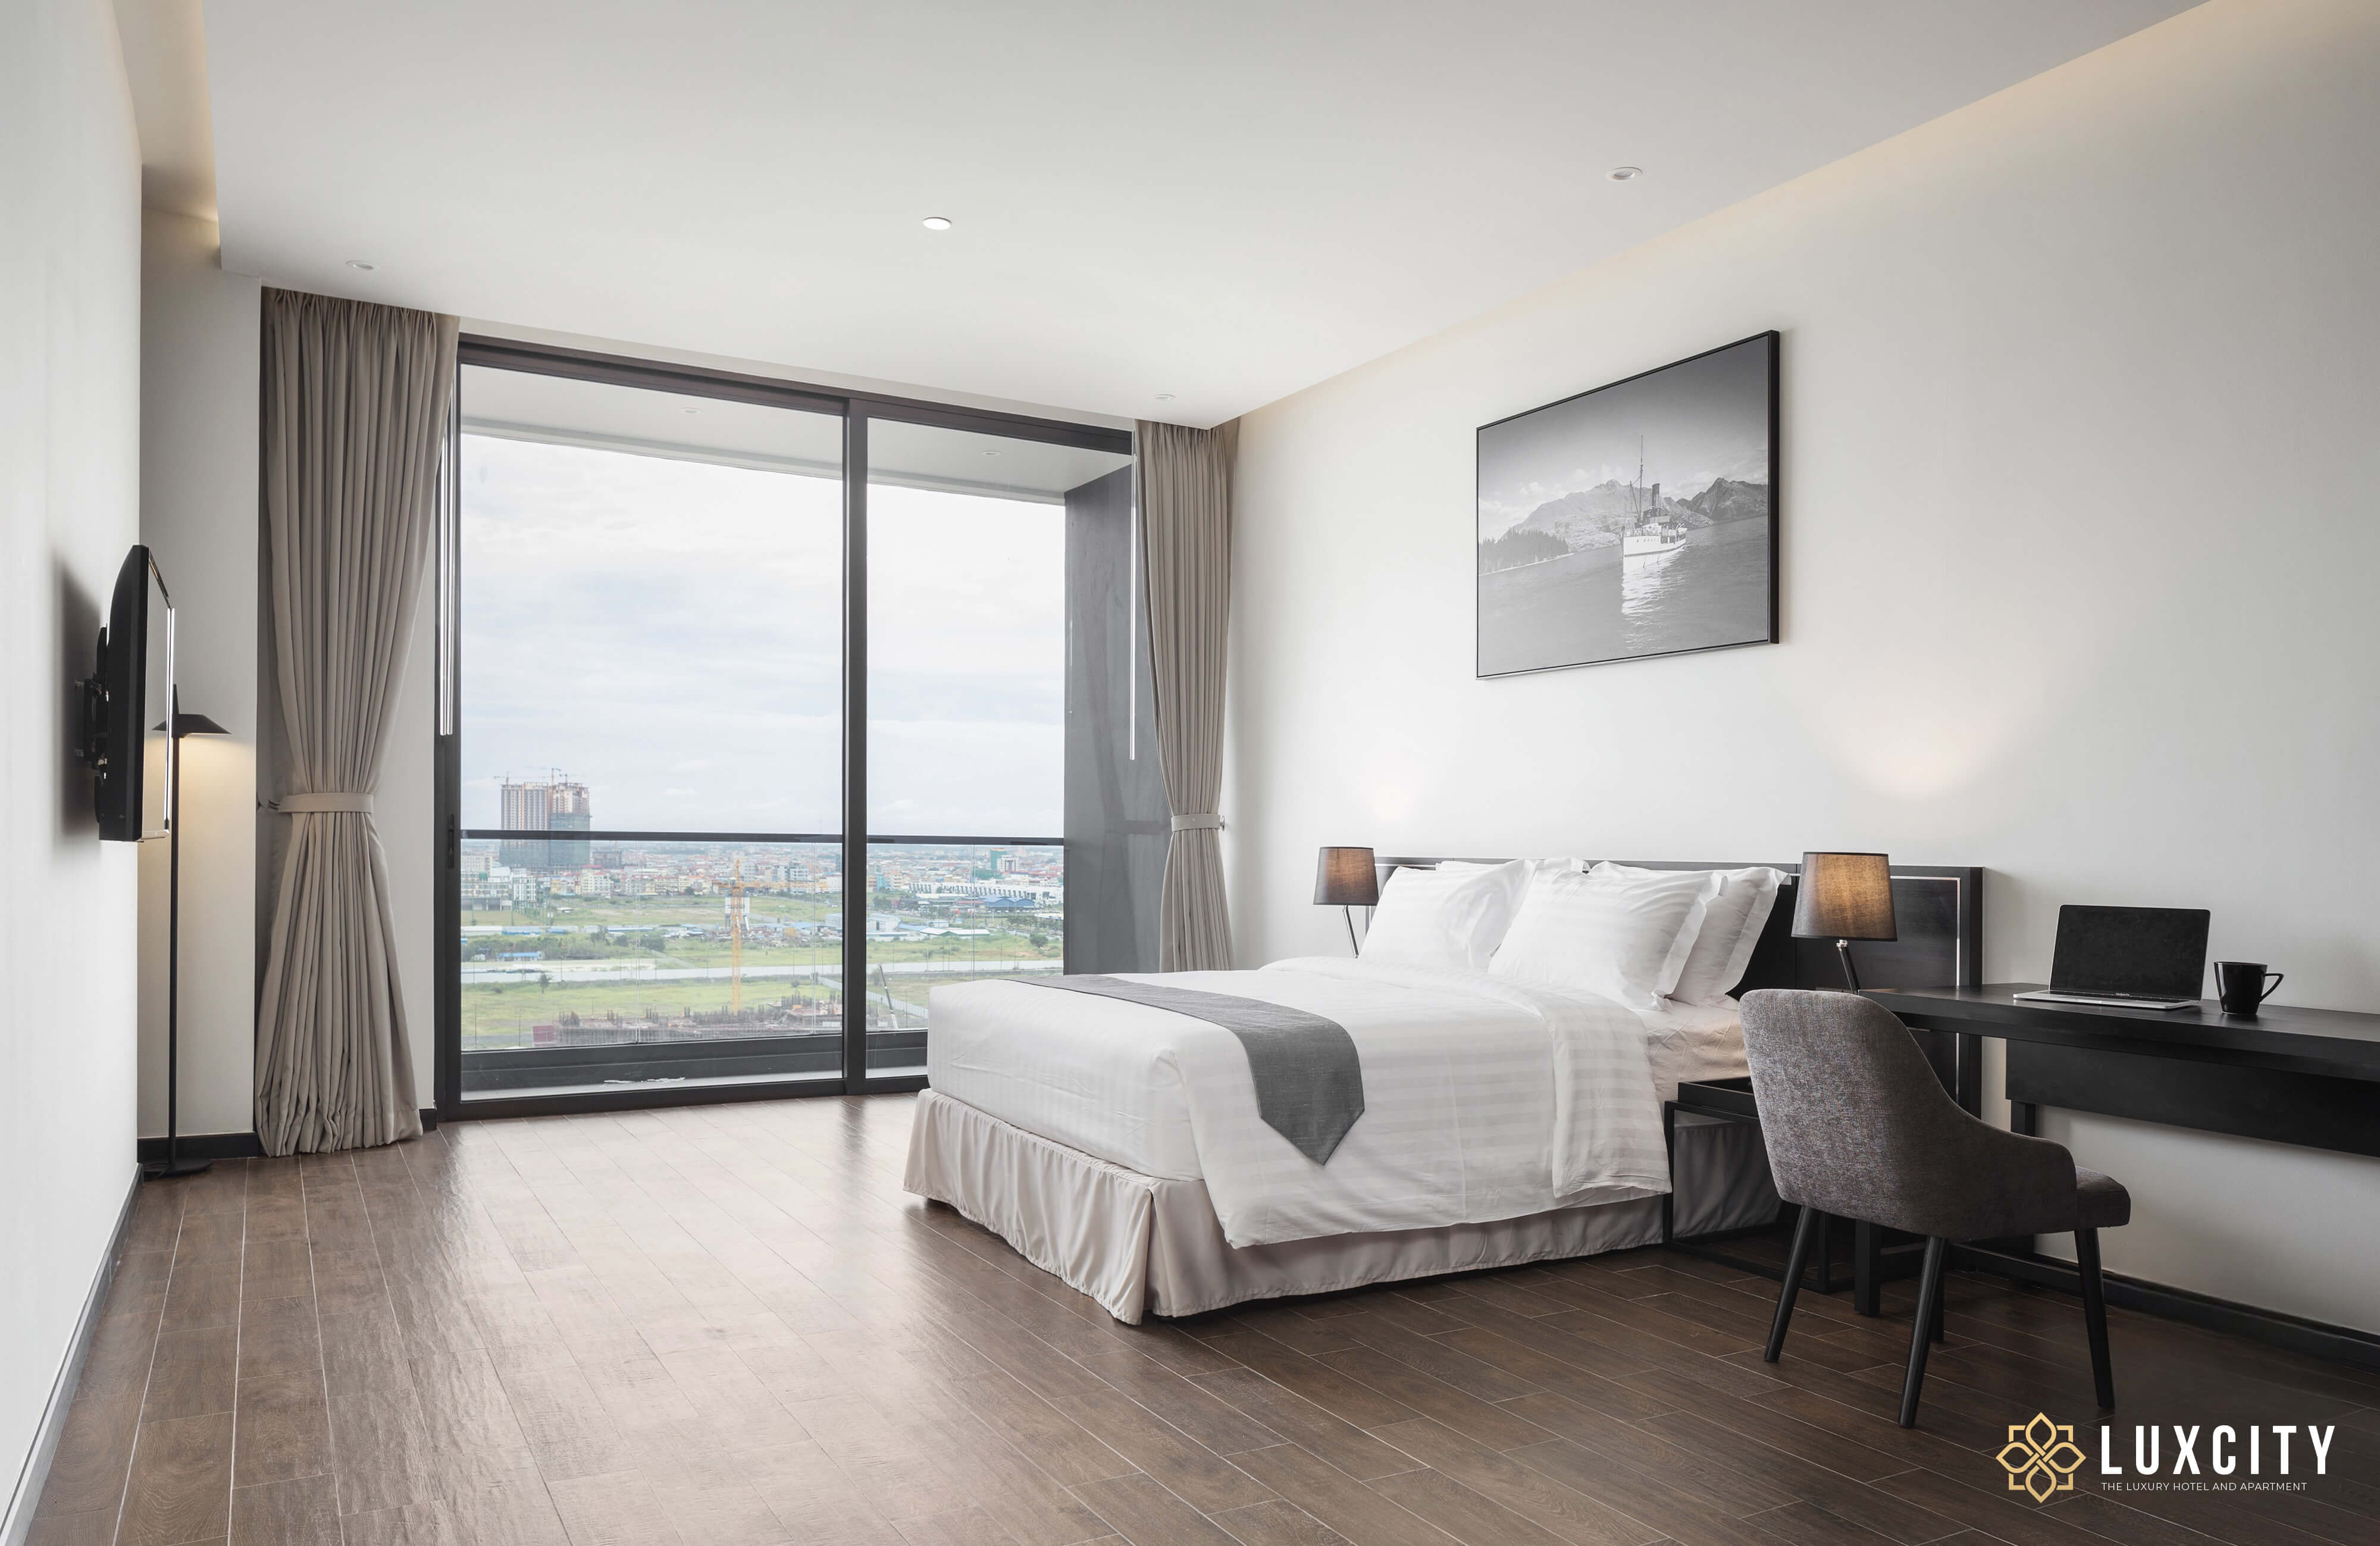 Luxcity Hotel & Apartment is one of the Phnom Penh Residences that many travelers love